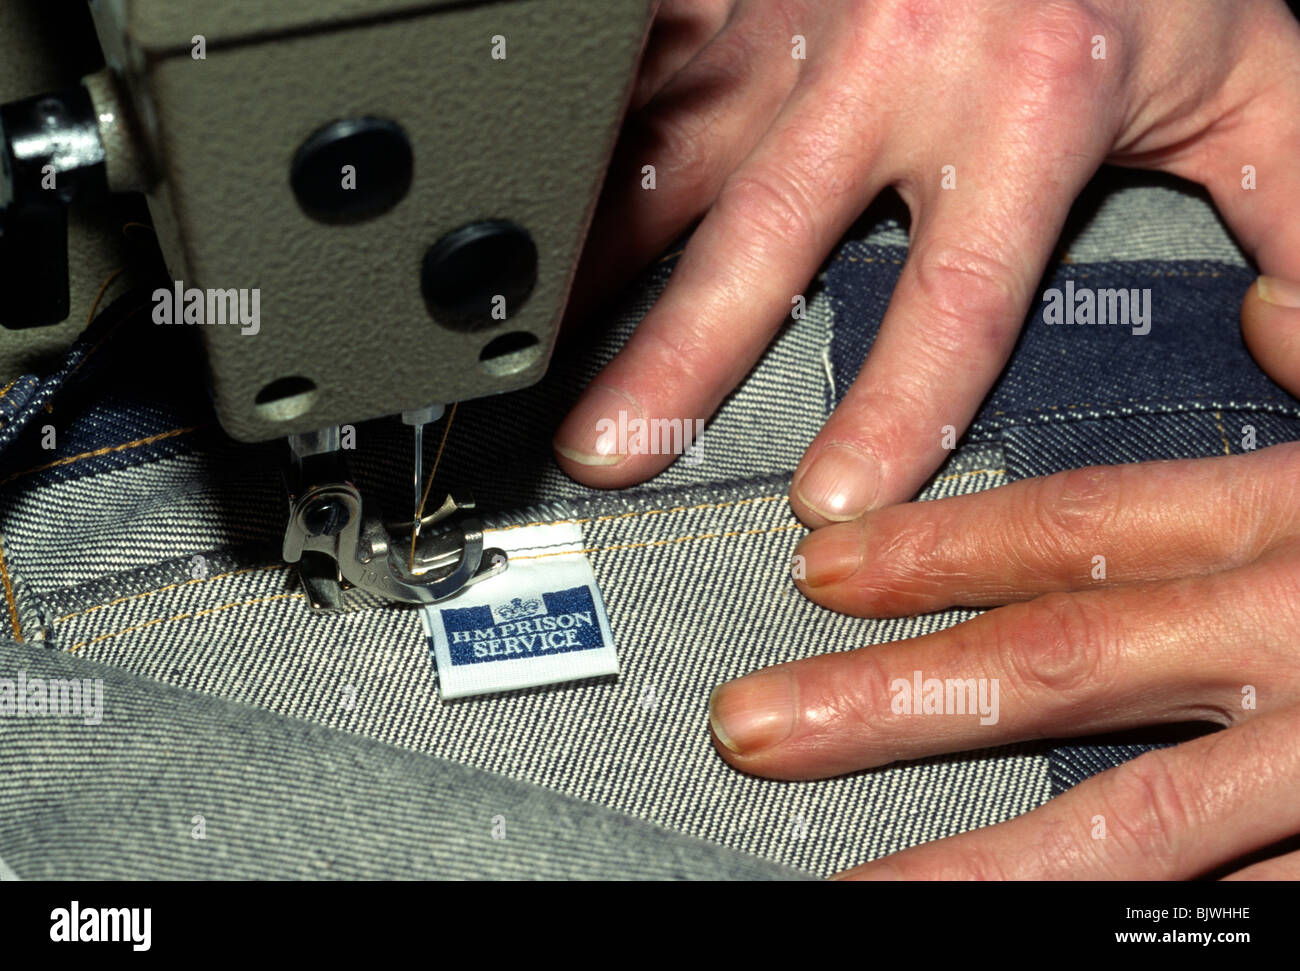 Sewing the label into a pair of prison regulation jeans, HM Prison Cardiff, Wales, UK. Stock Photo